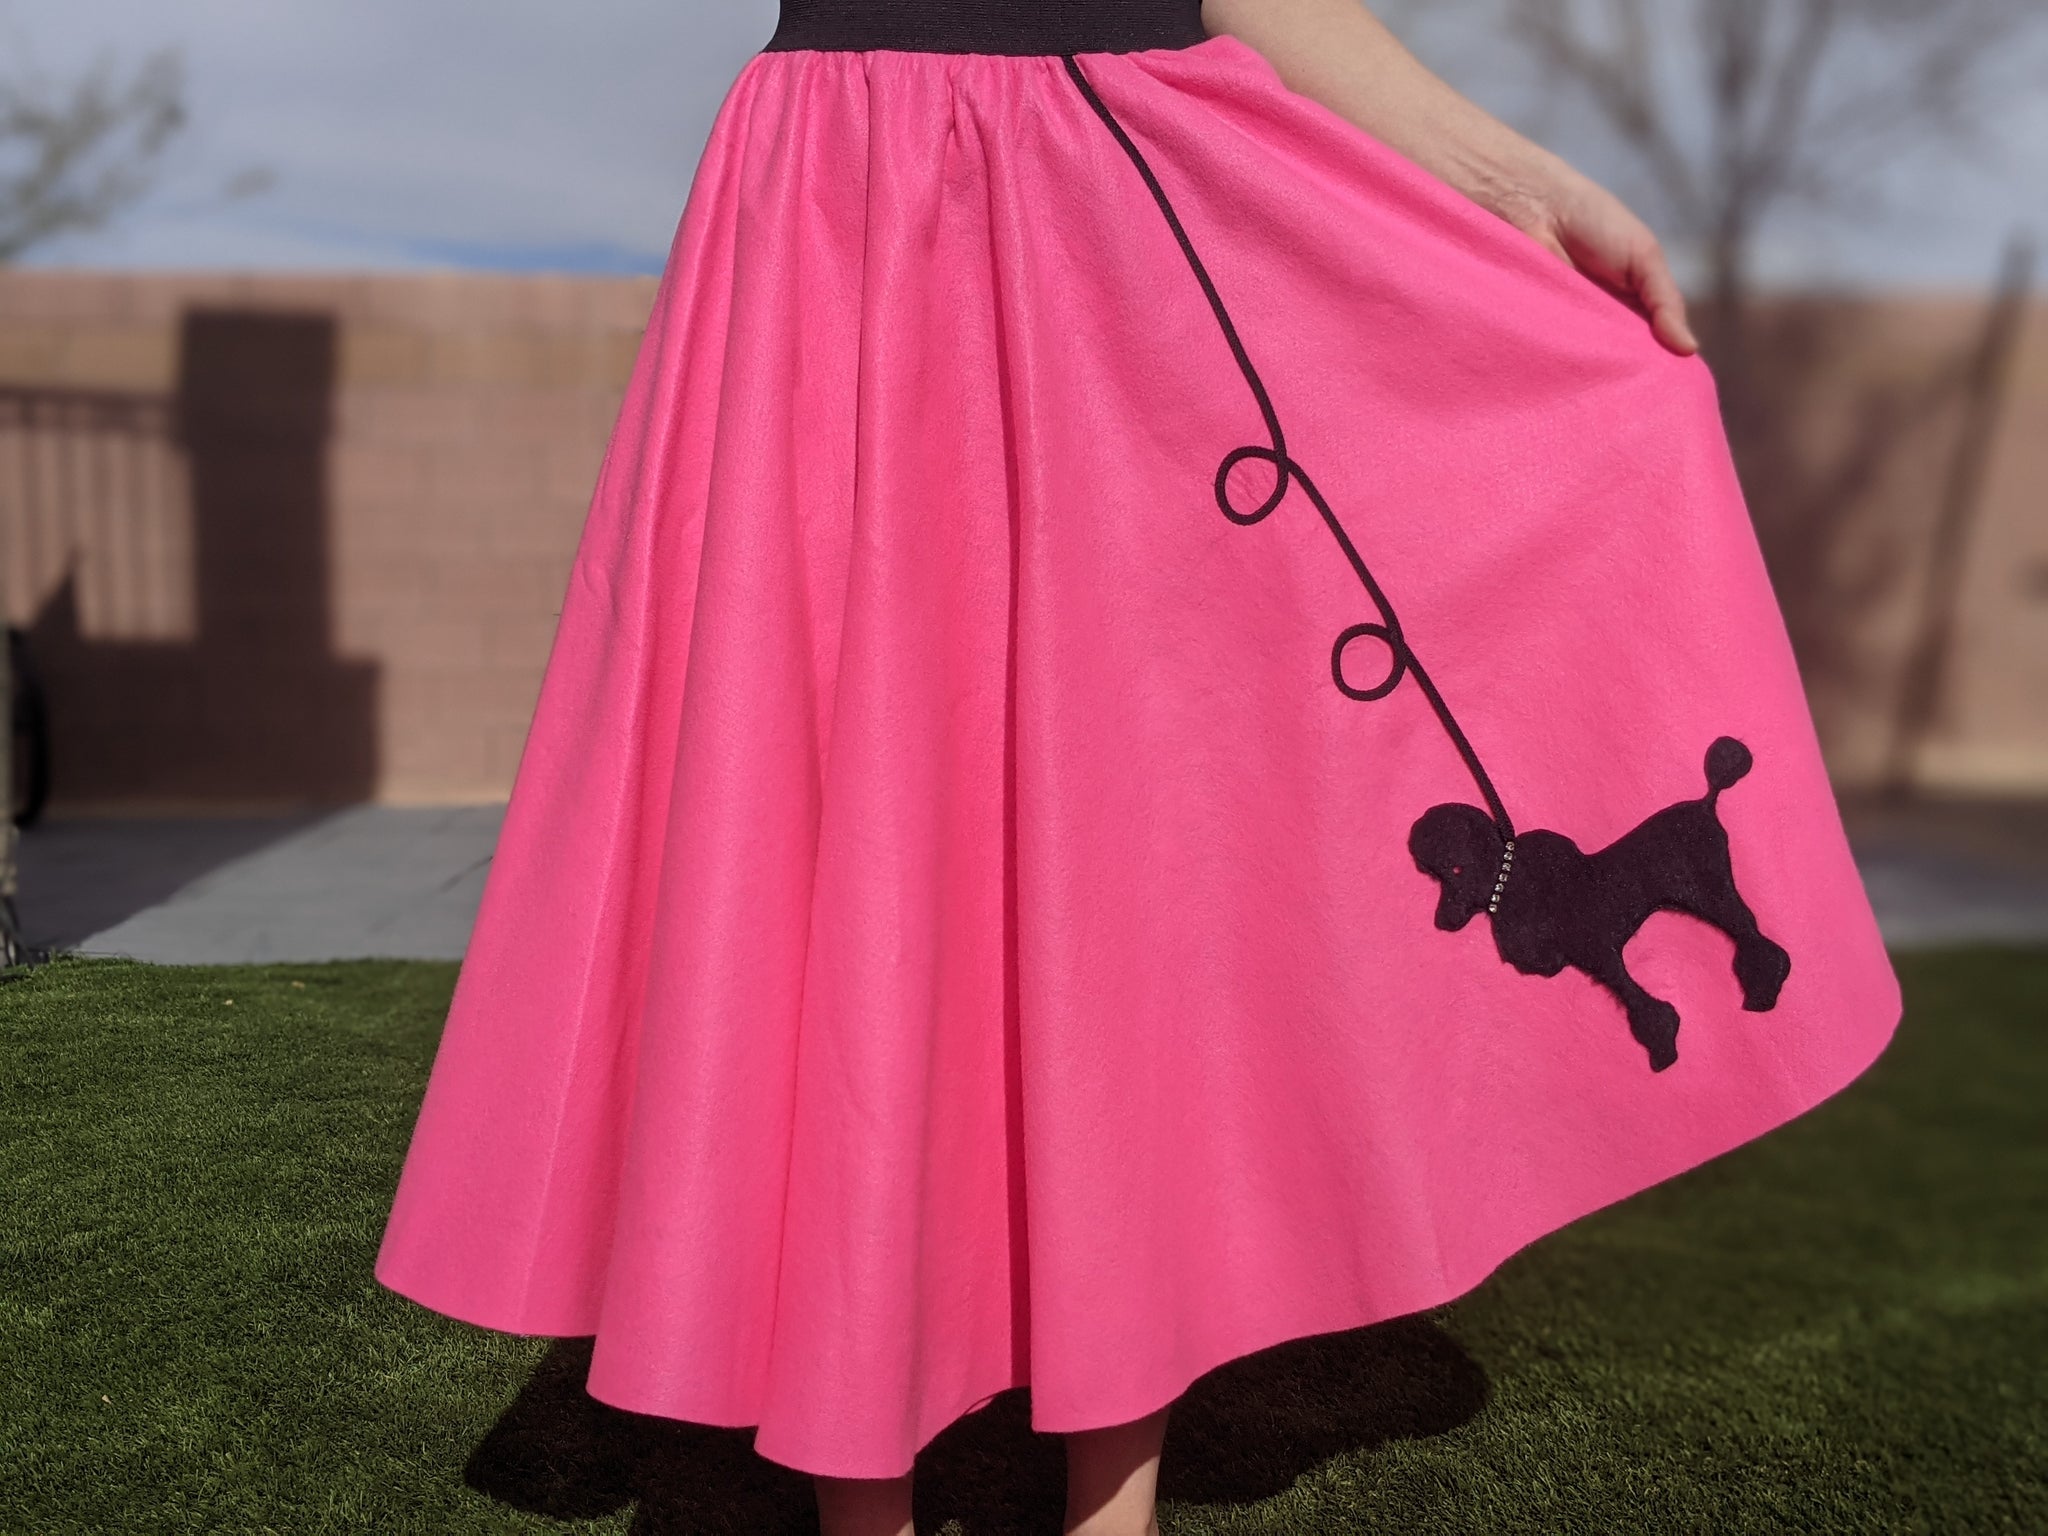 Womens 1950s Poodle Skirt USA Made by Pookey Snoo - Perfect Outfit for Sock  Hop or Halloween costume – Pookey Snoo Poodle Skirts